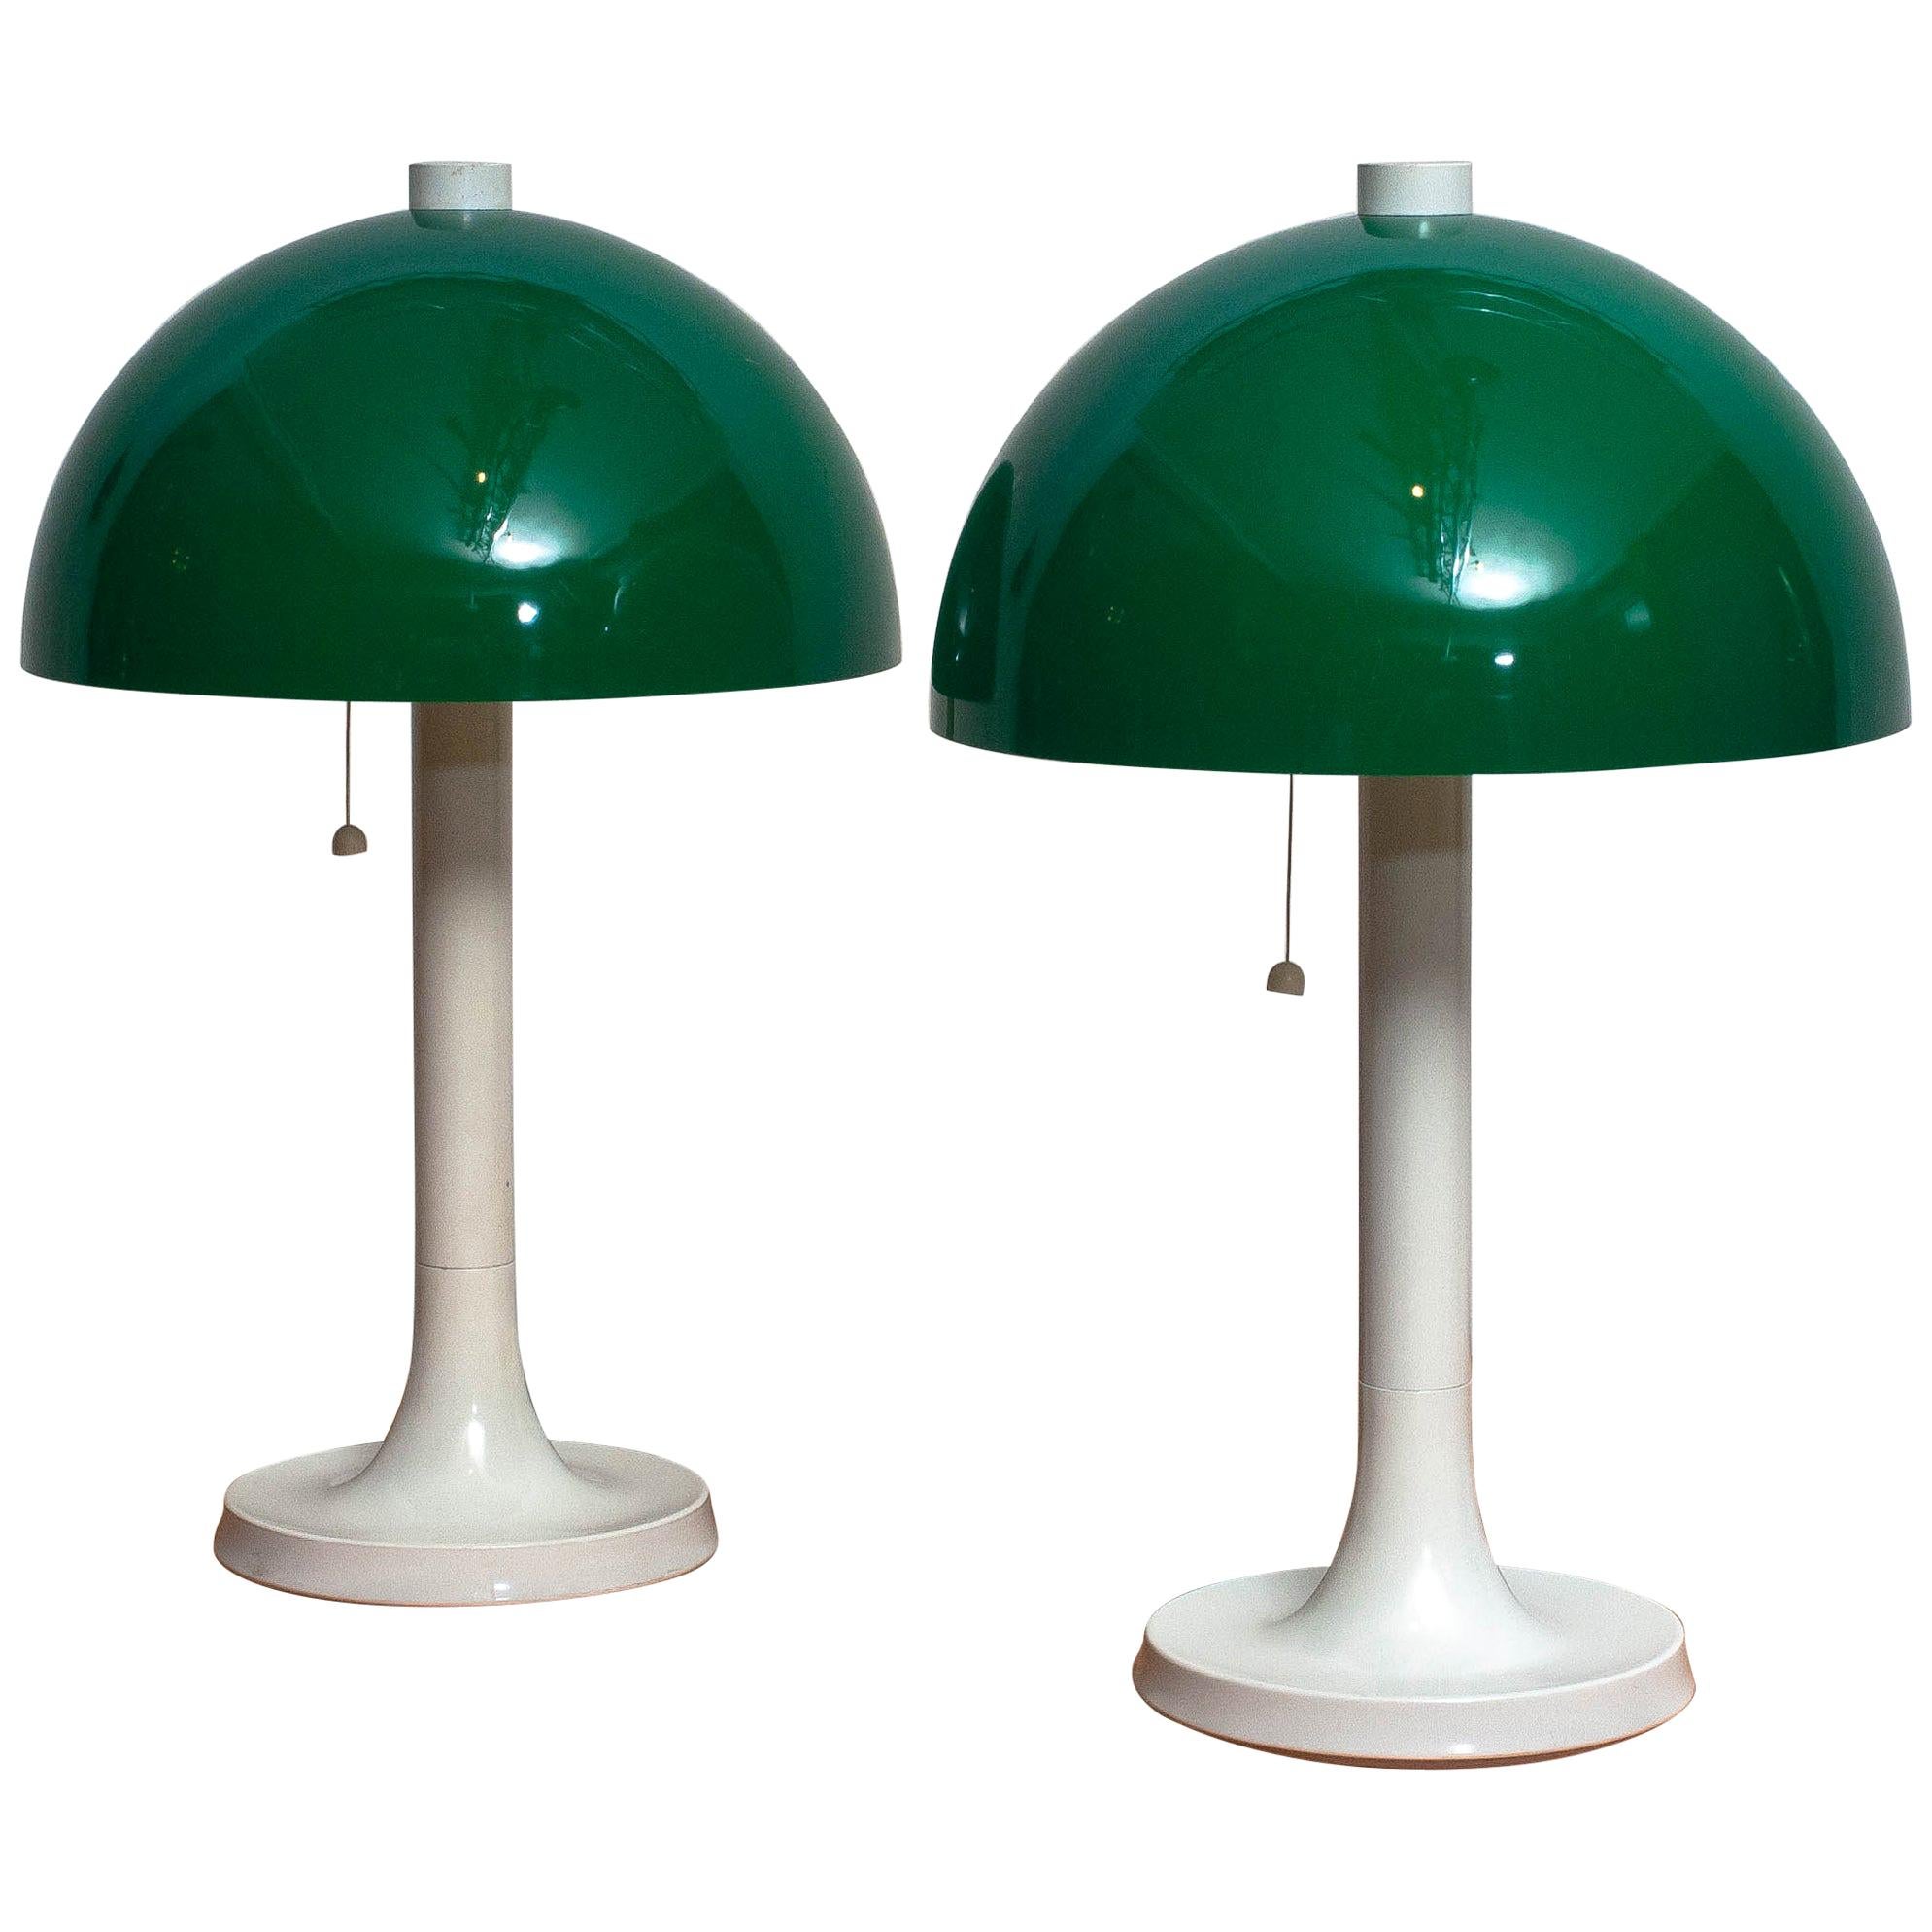 A nice set of two table or desk lamps made by Falkenbergs Belsyning, Sweden.
These lamps have white stands with green shades and each lamp has two fittings.
The lamps are in a nice condition wear consistent with age and use.